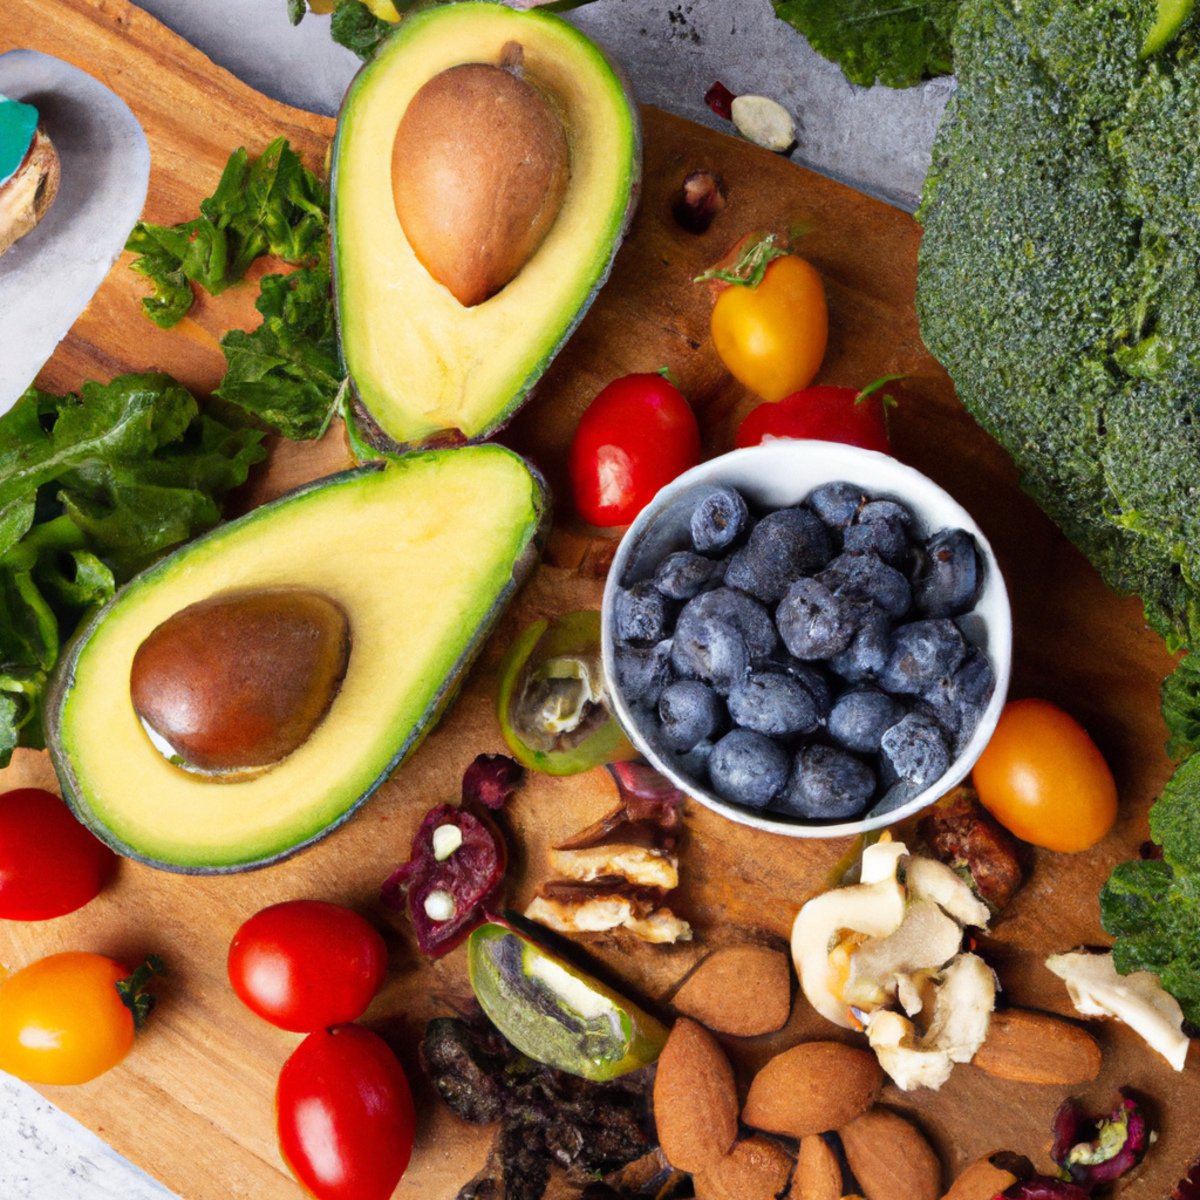 The photo features a colorful array of superfoods arranged on a wooden cutting board. In the center of the photo, a ripe avocado is sliced in half, revealing its creamy green flesh and large pit. Surrounding the avocado are vibrant red and yellow cherry tomatoes, crisp green kale leaves, and plump blueberries. A handful of raw almonds and walnuts are scattered around the edges of the board, adding a crunchy texture to the mix. The photo captures the freshness and variety of superfoods, enticing readers to incorporate these nutrient-rich ingredients into their diets for a healthier lifestyle.